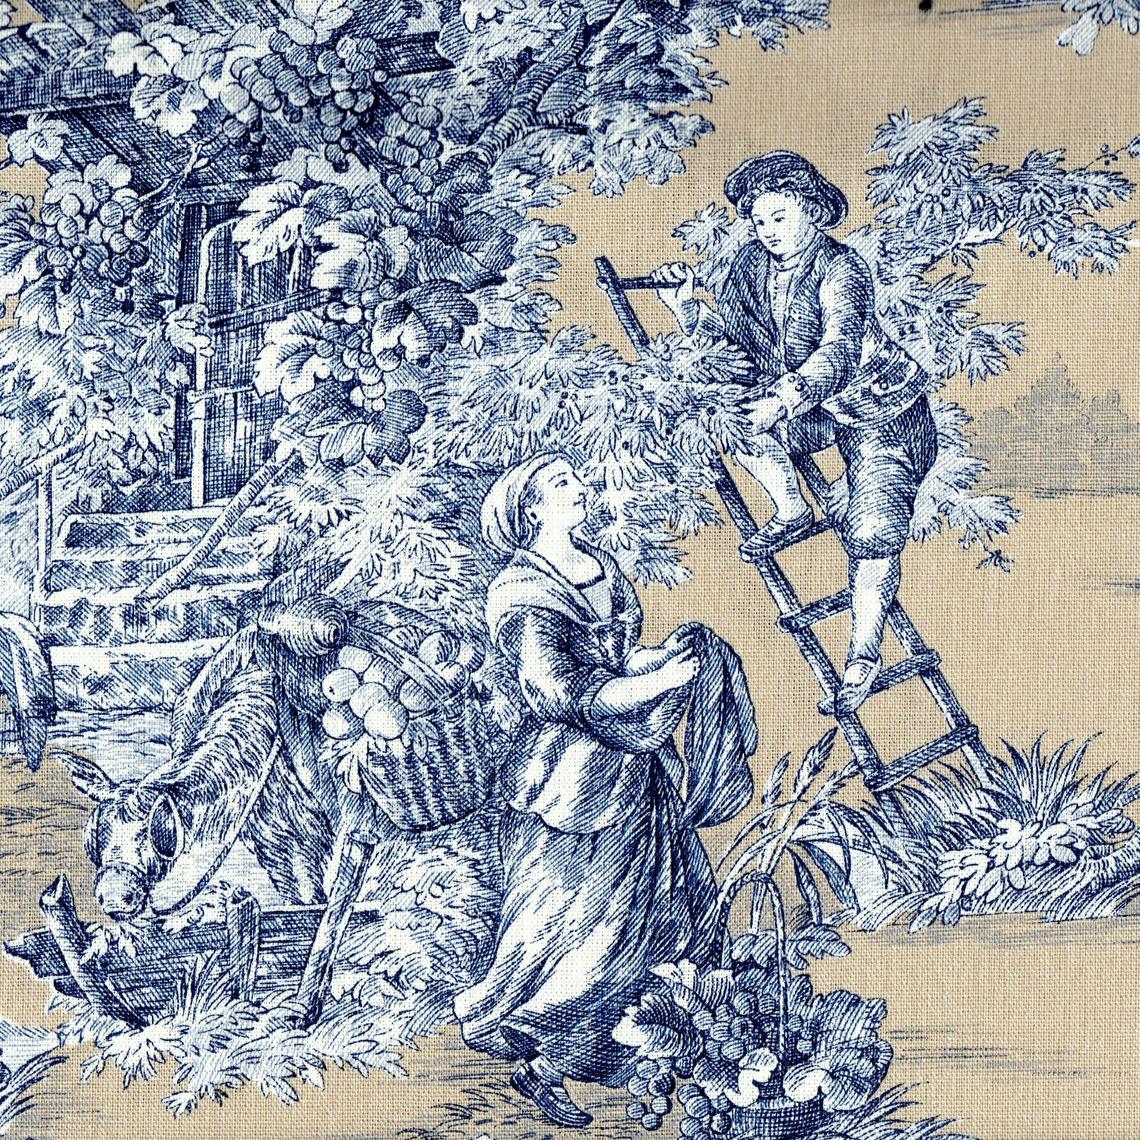 tailored valance in pastorale #88 blue on beige french country toile